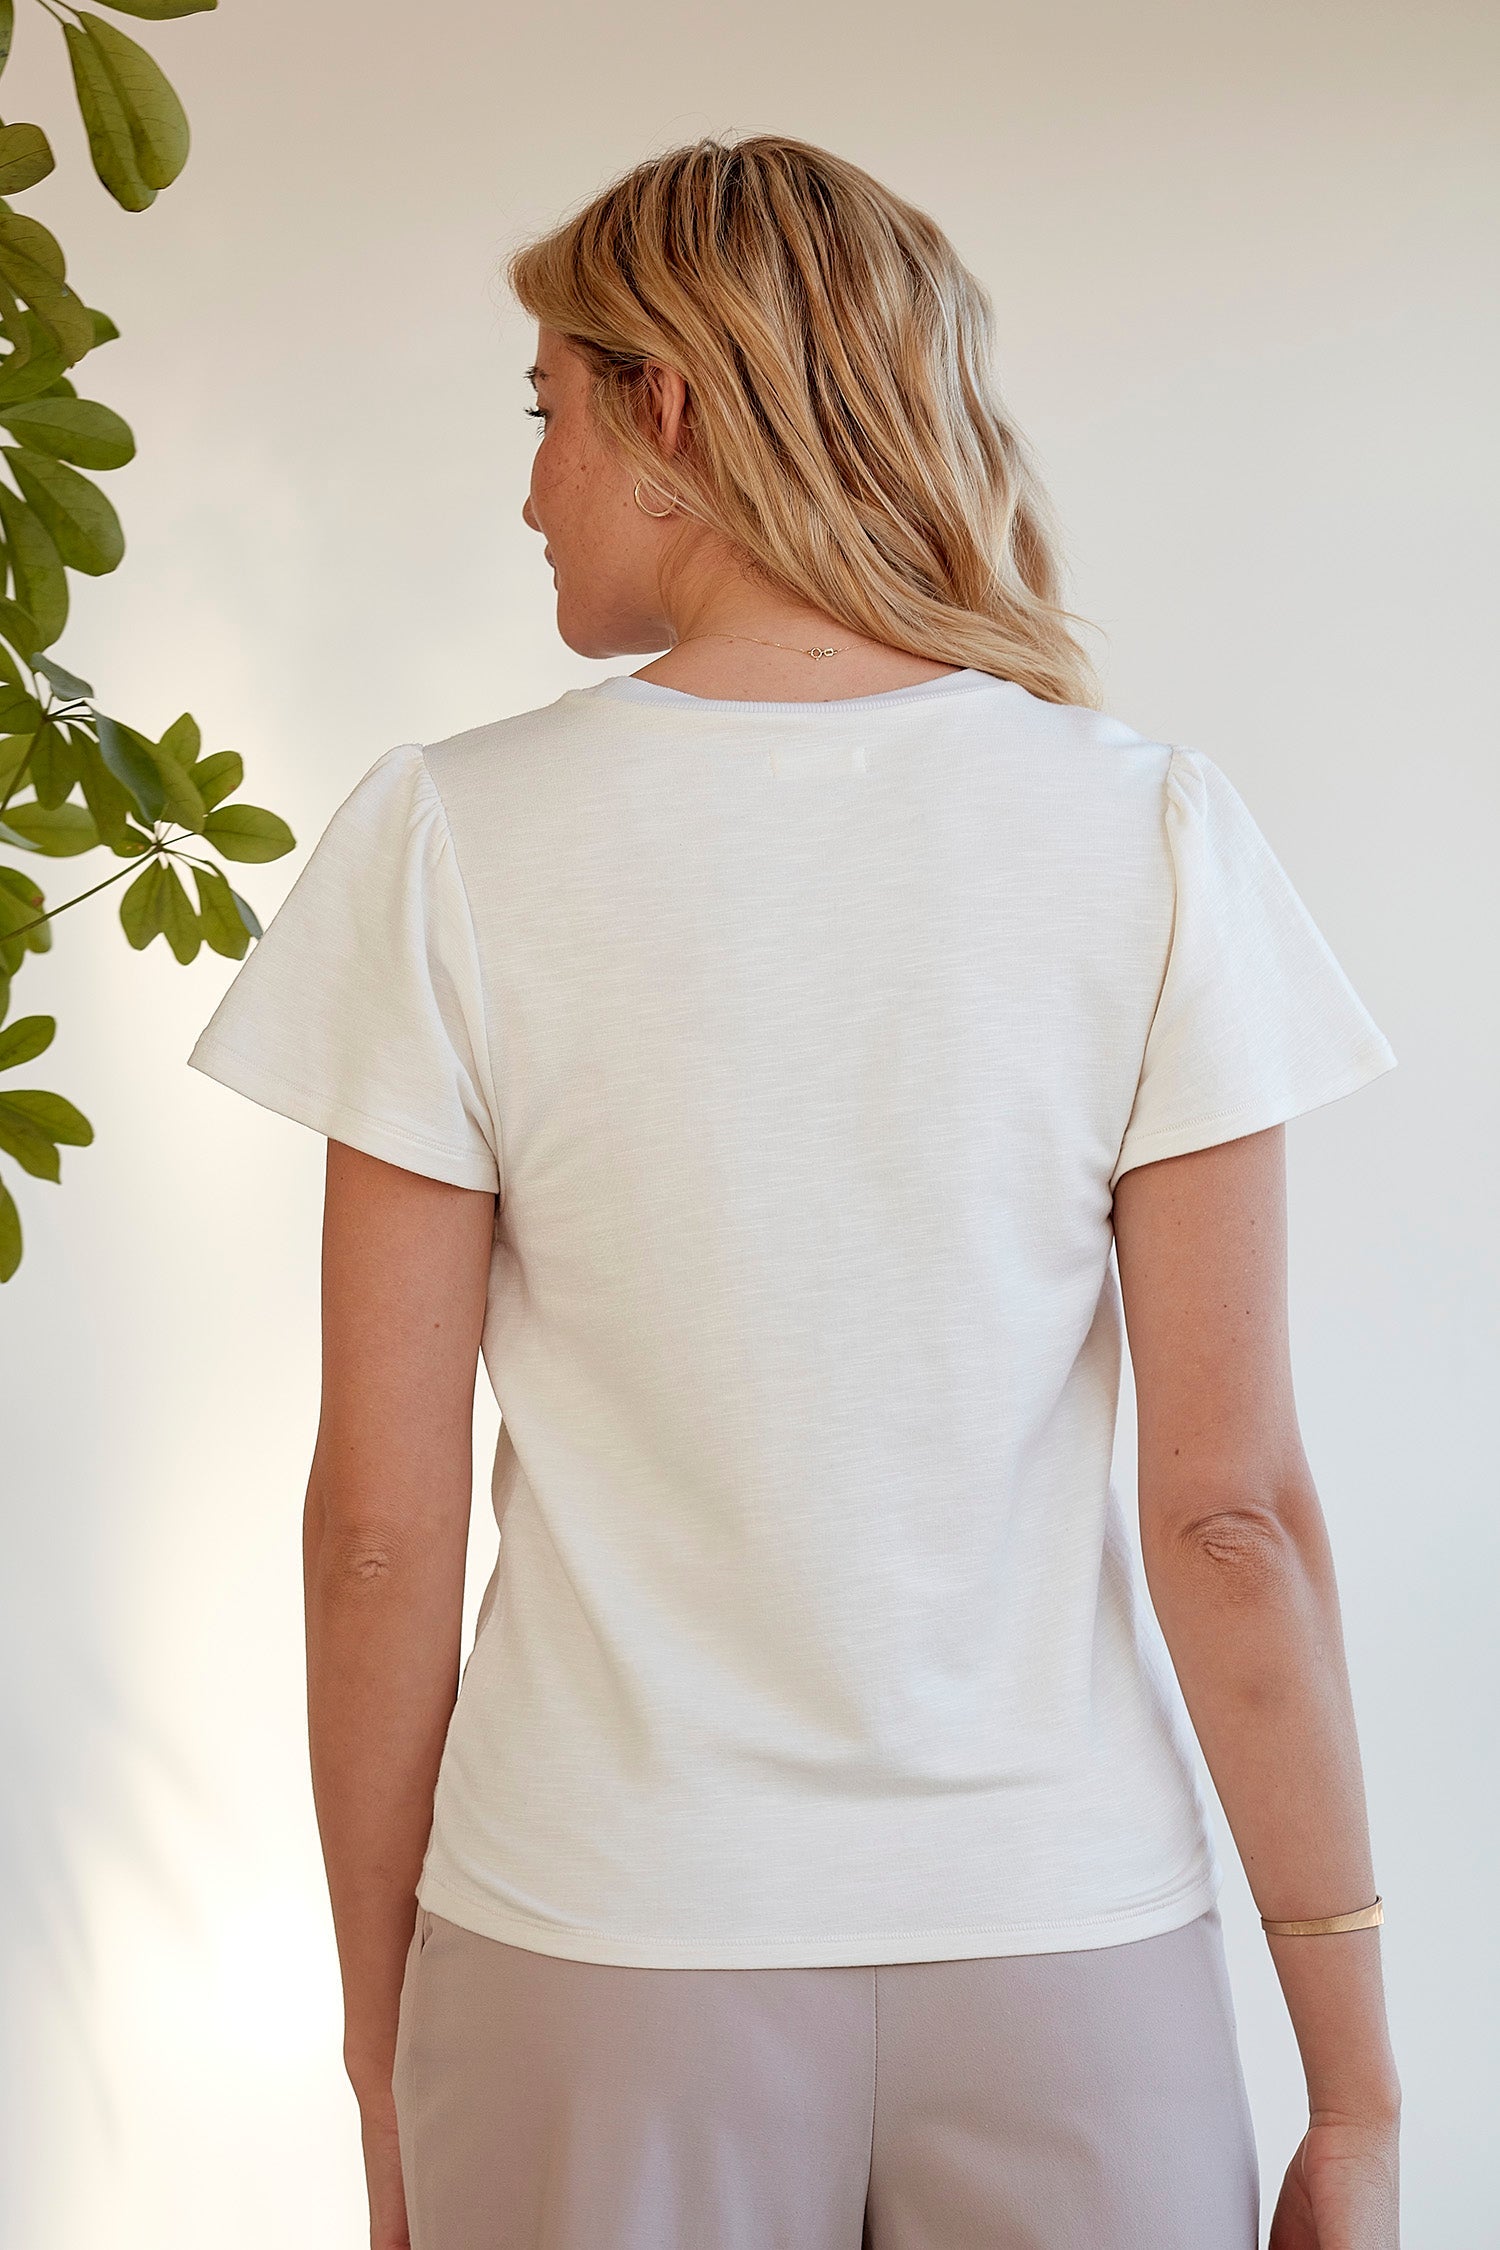 flutter sleeve top basic white t-shirt made sustainably